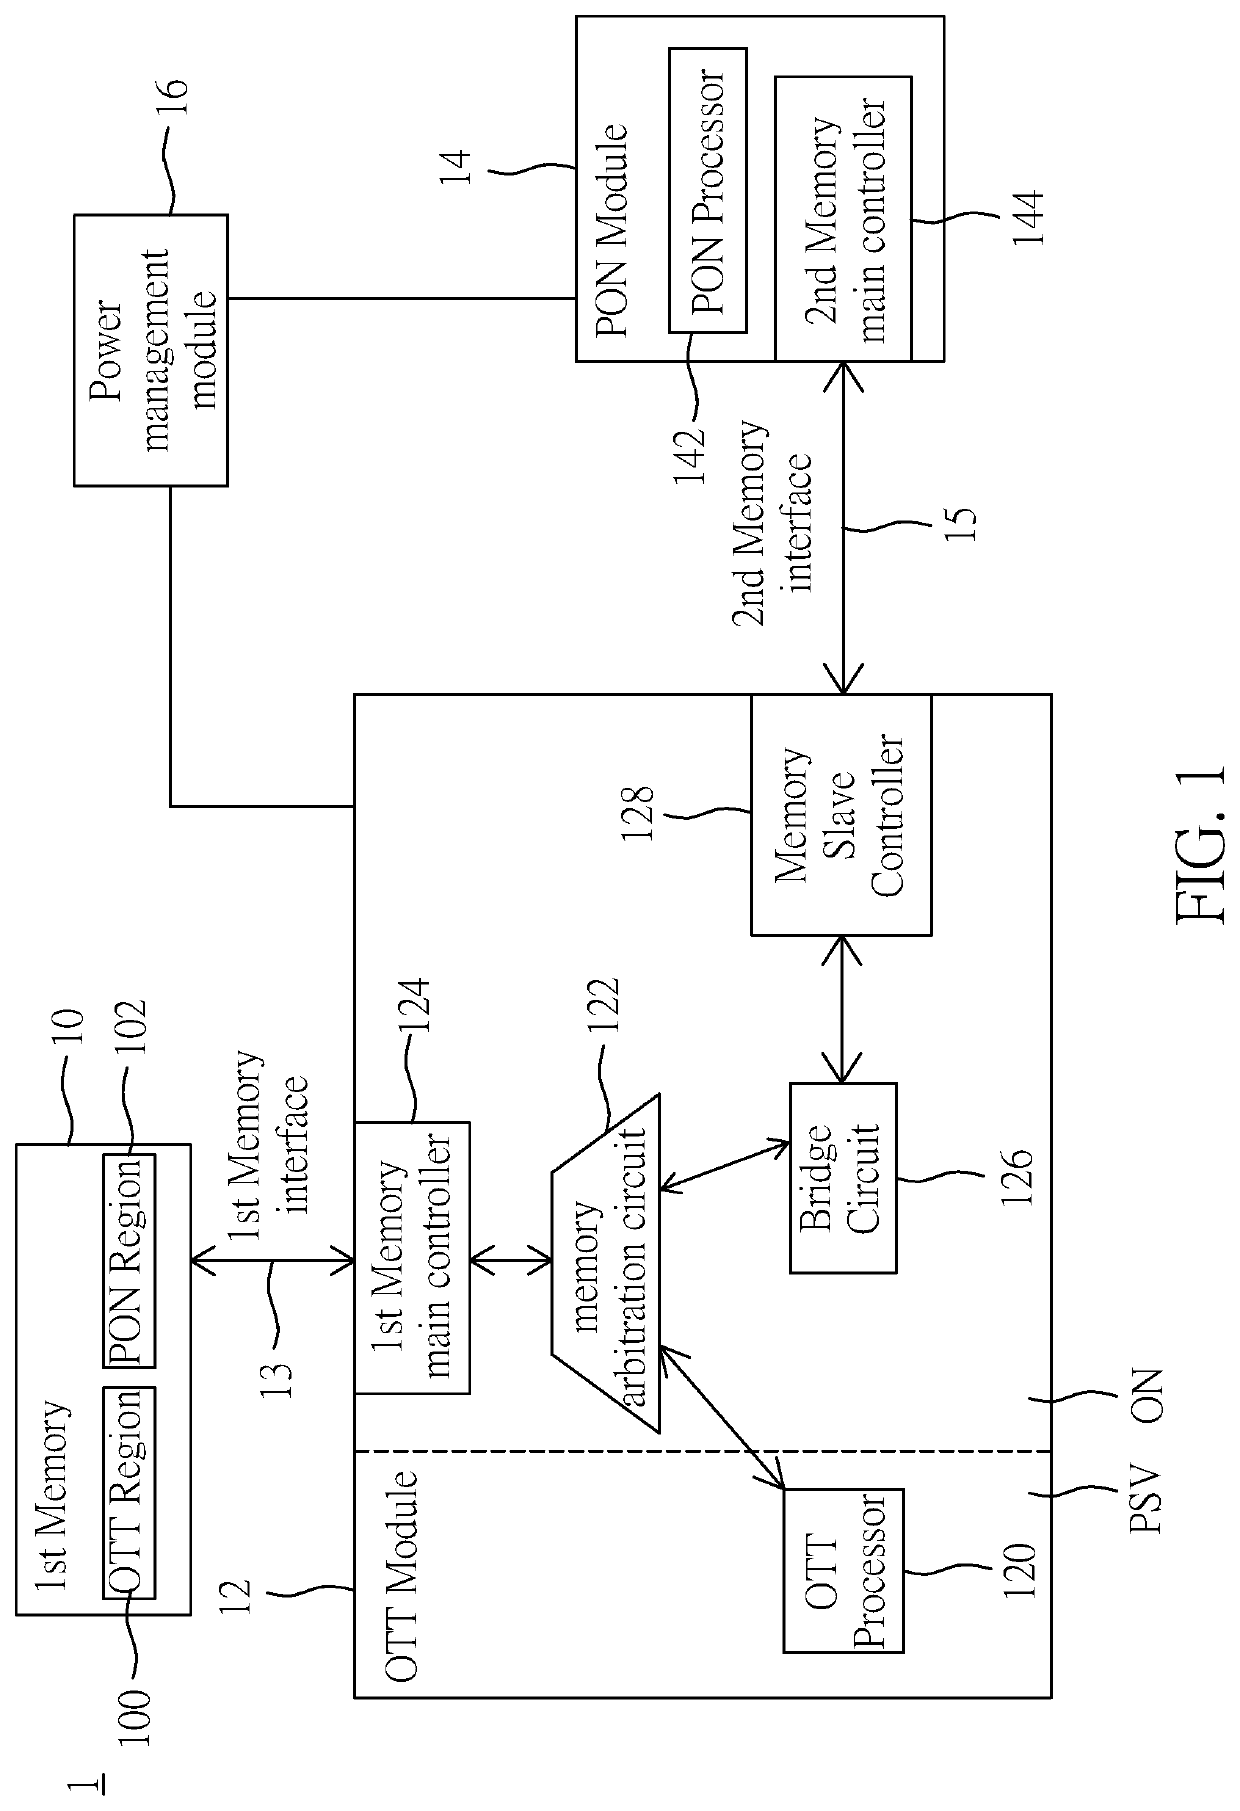 Memory sharing dual-mode network communication device